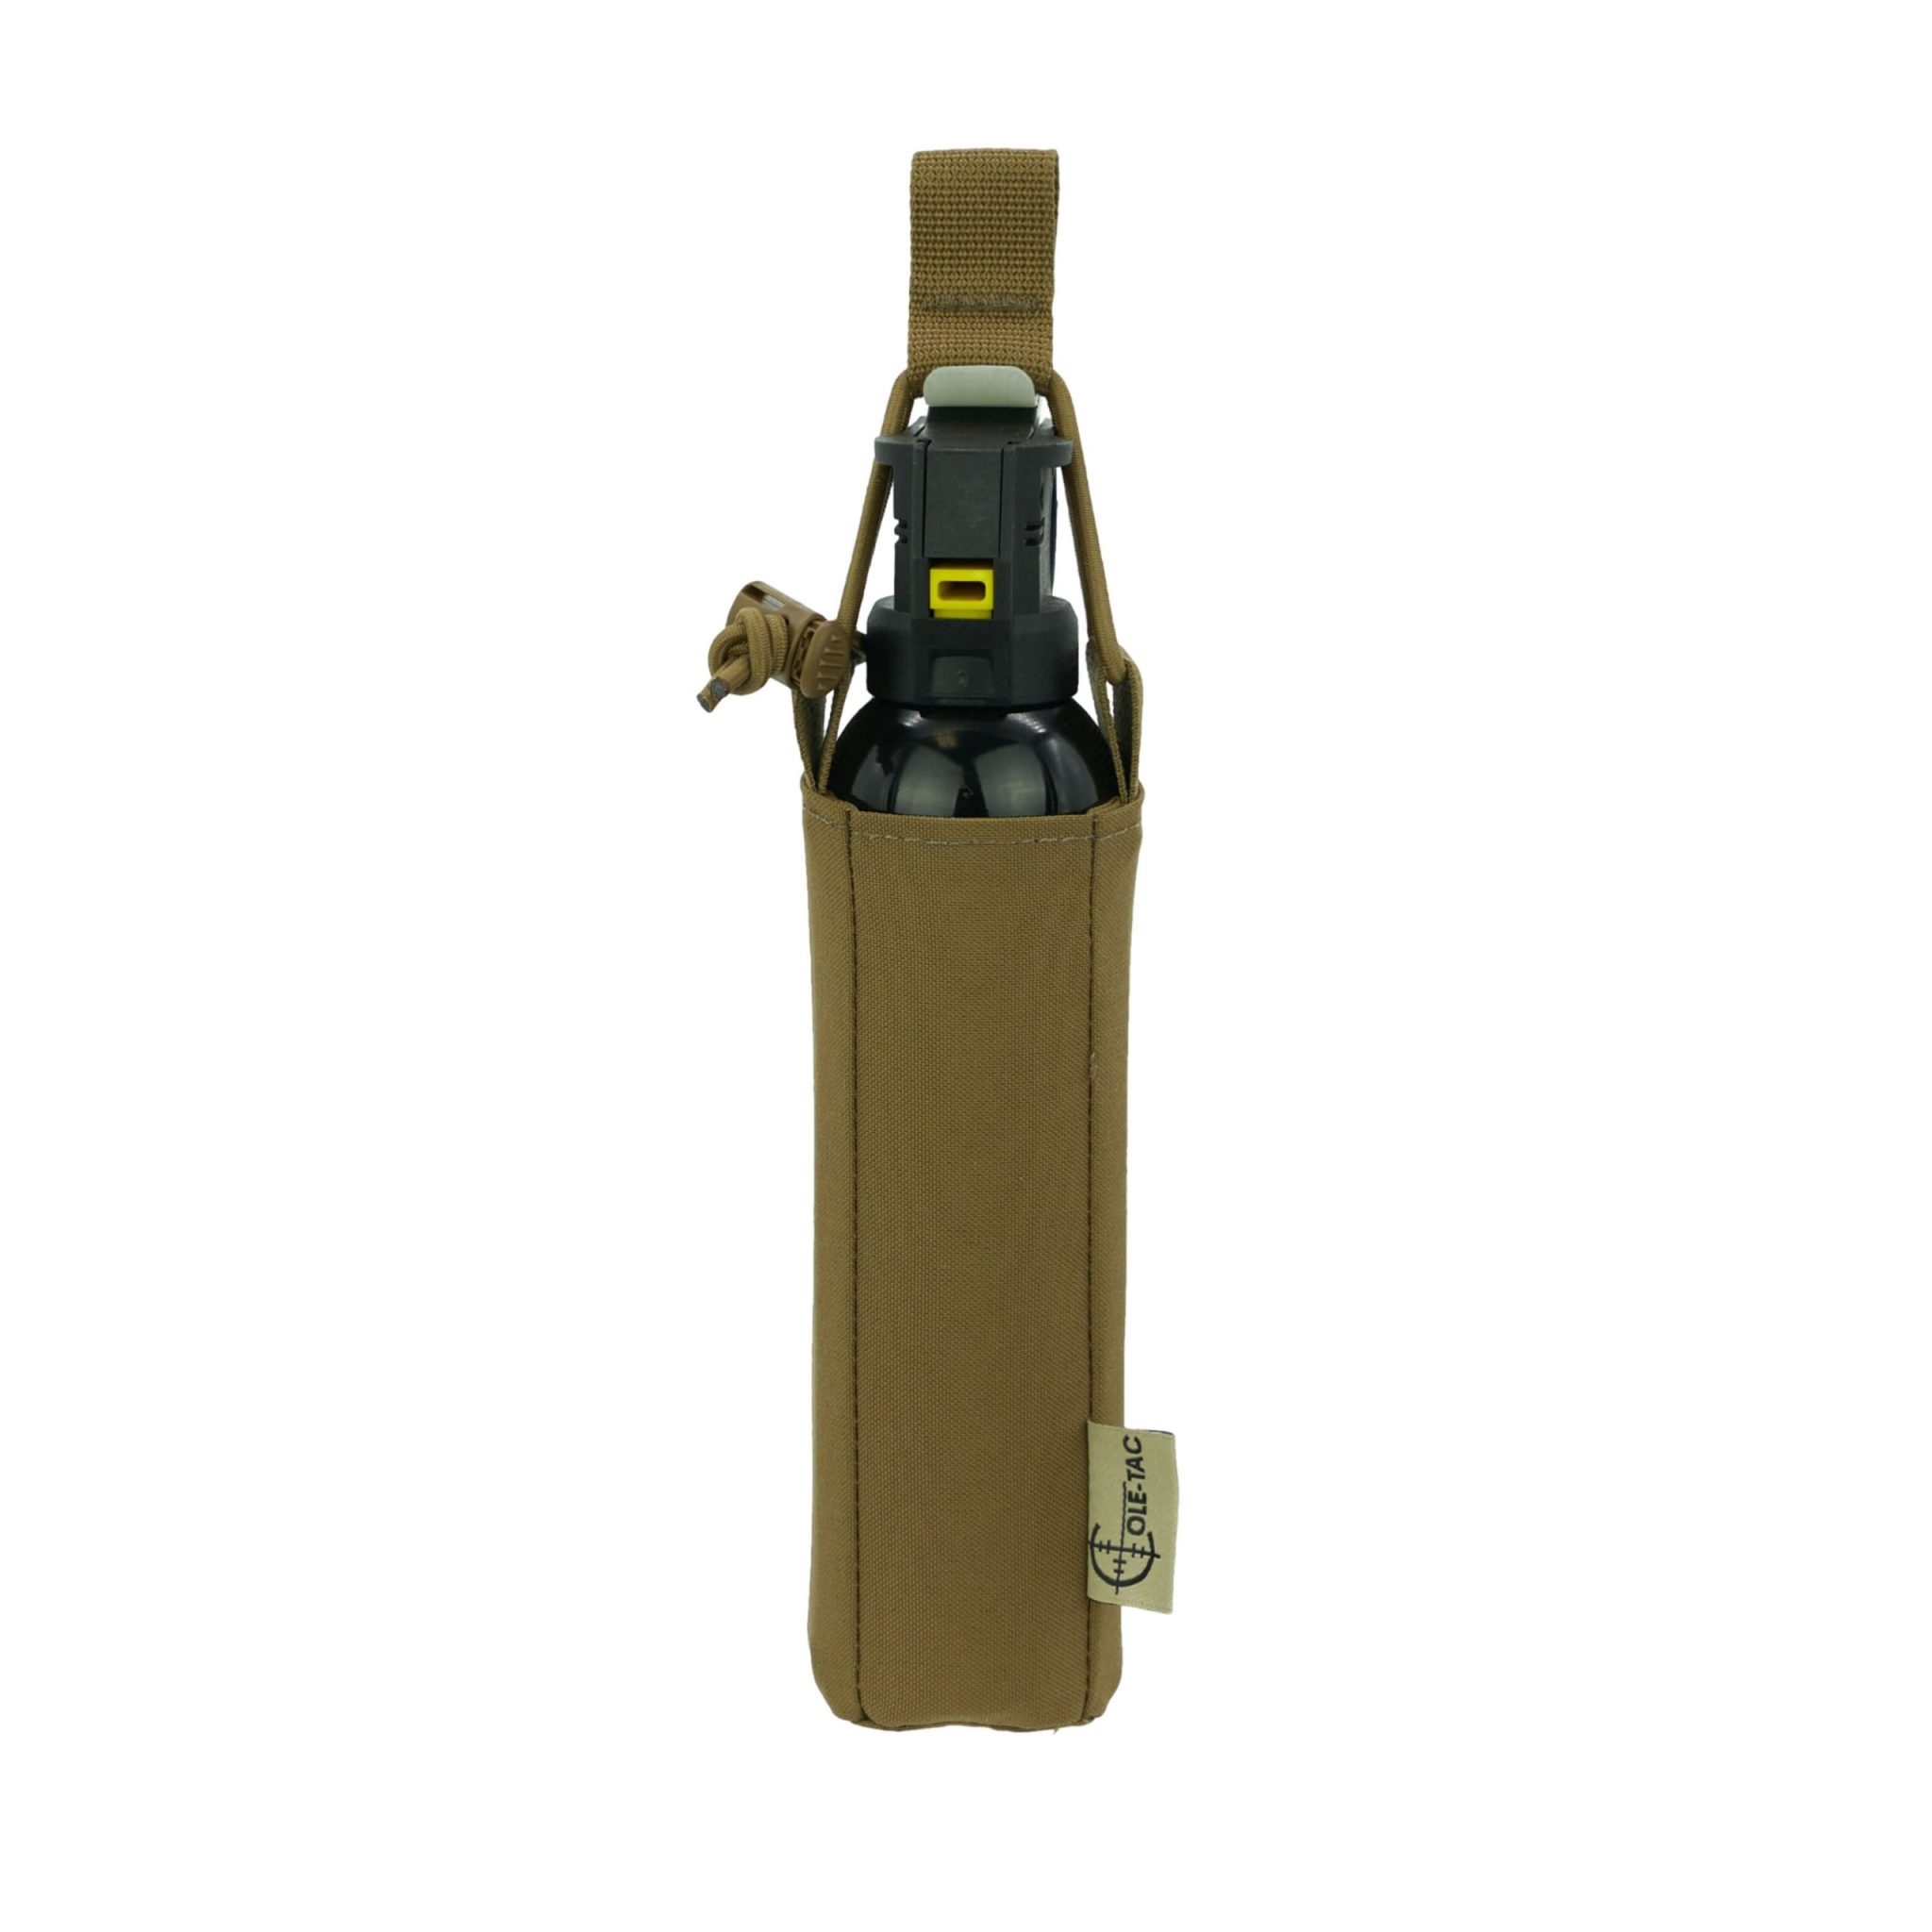 COLE-TAC COLE-TAC BEAR SPRAY POUCH, COYOTE BROWN